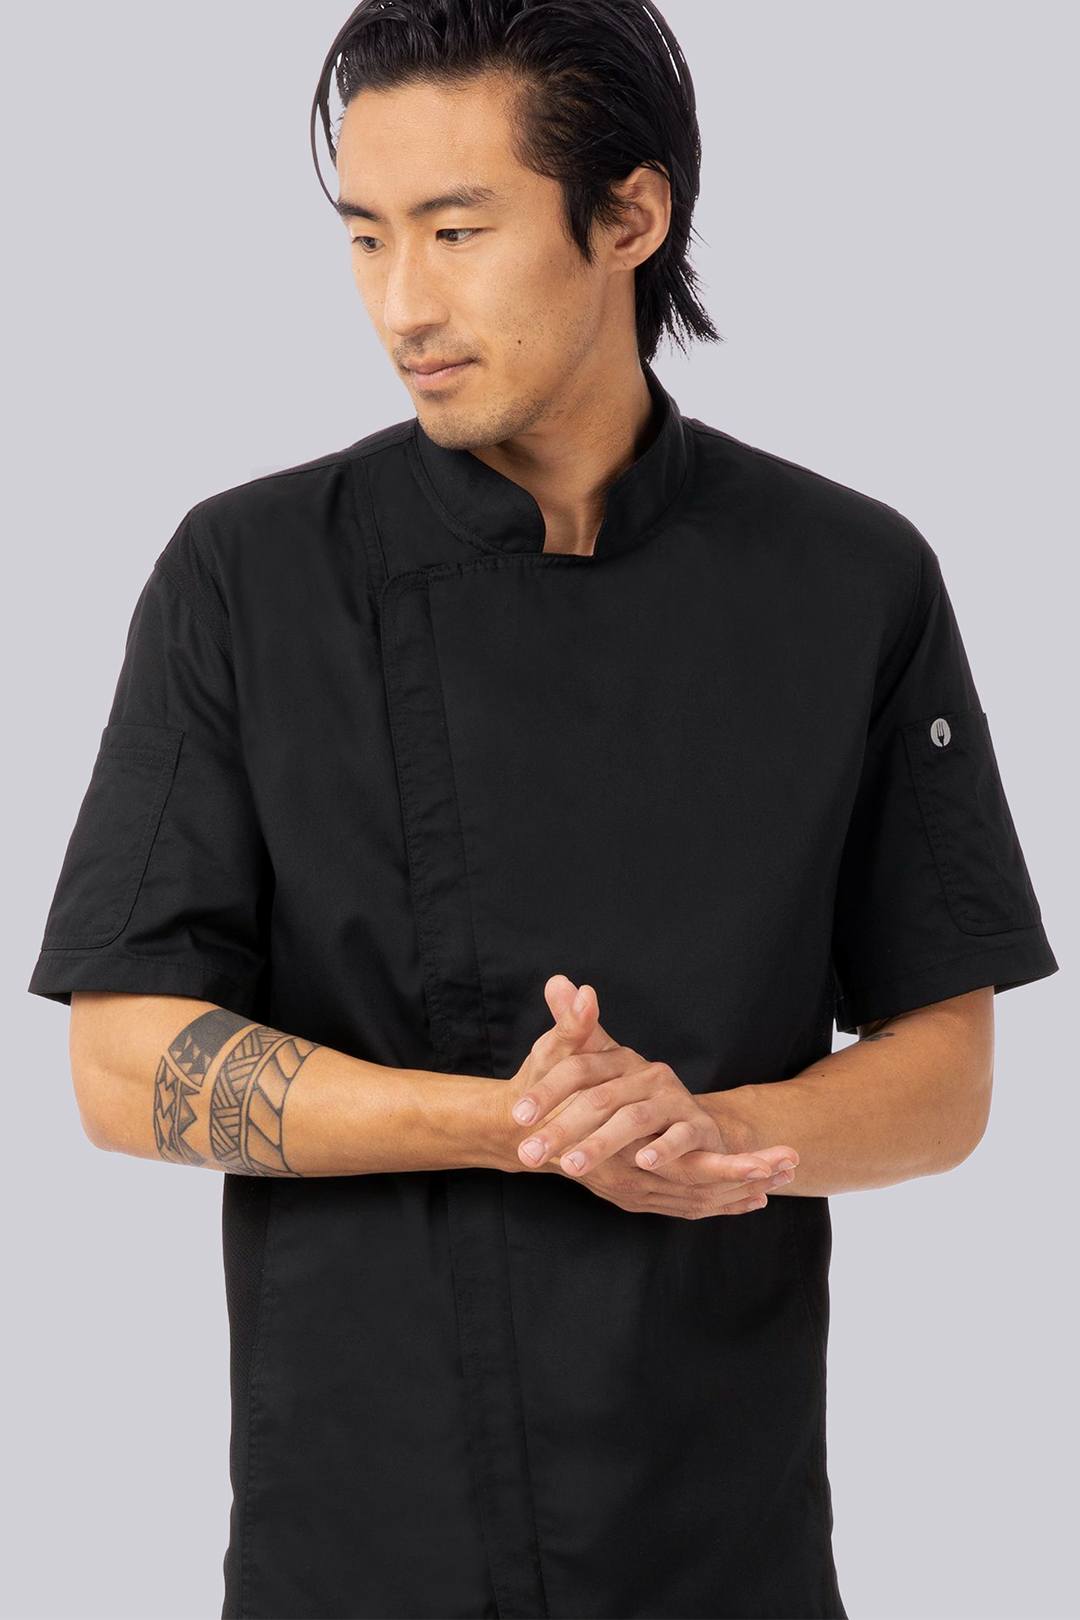 Chef Works Mens Short Sleeve Cloth Button Coat Jacket Size XS or 3XL BNWT Black 